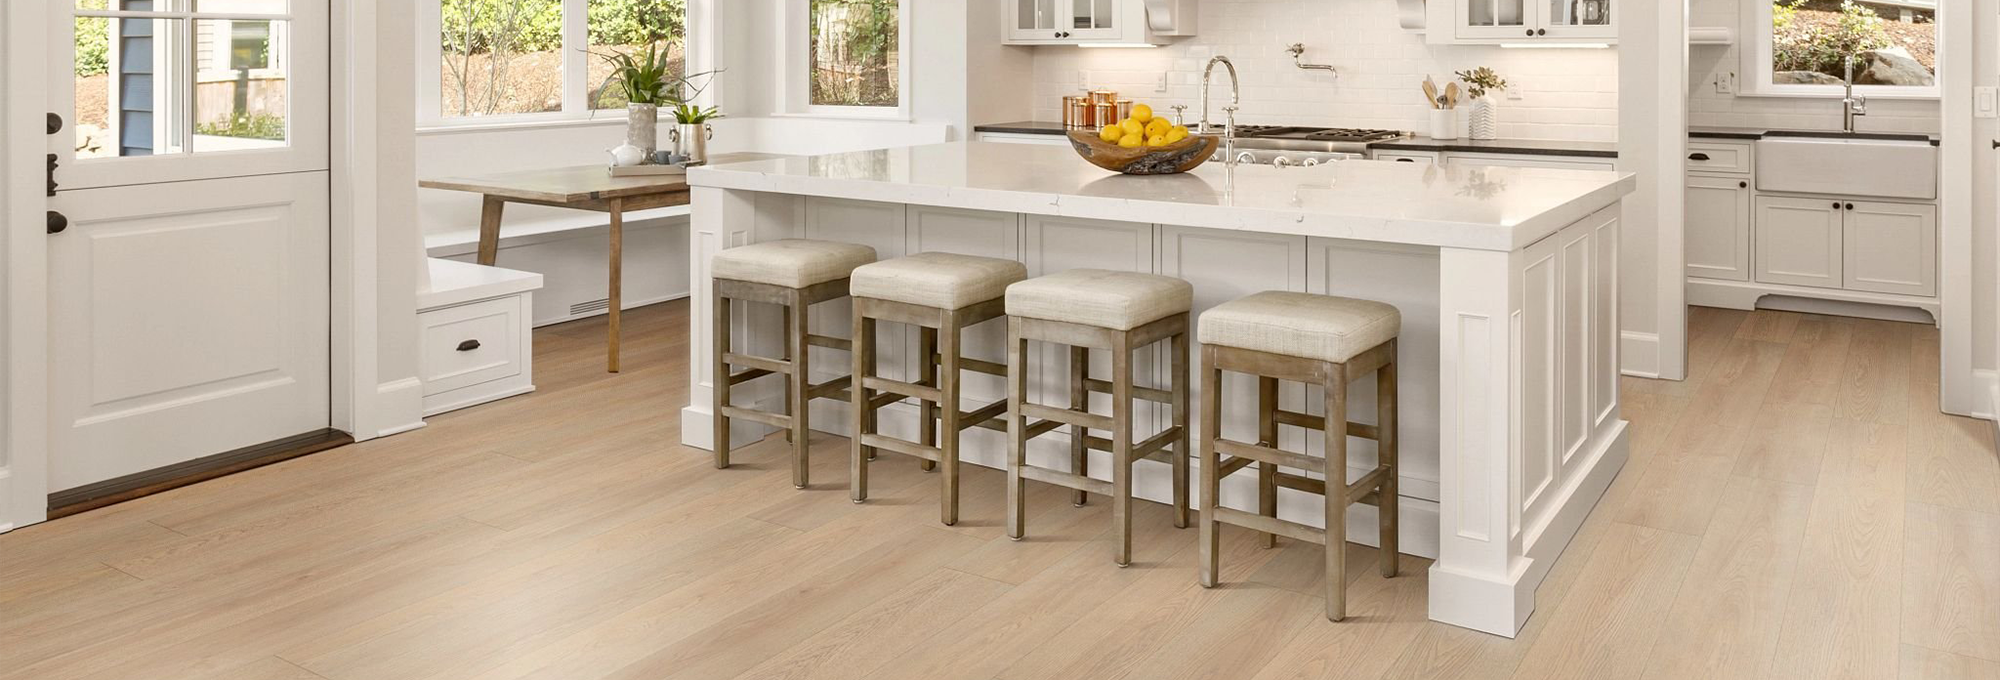 Kitchenette Area With Vinyl Plank Flooring And Stools provided by Direct Sales Floors in Danville, CA